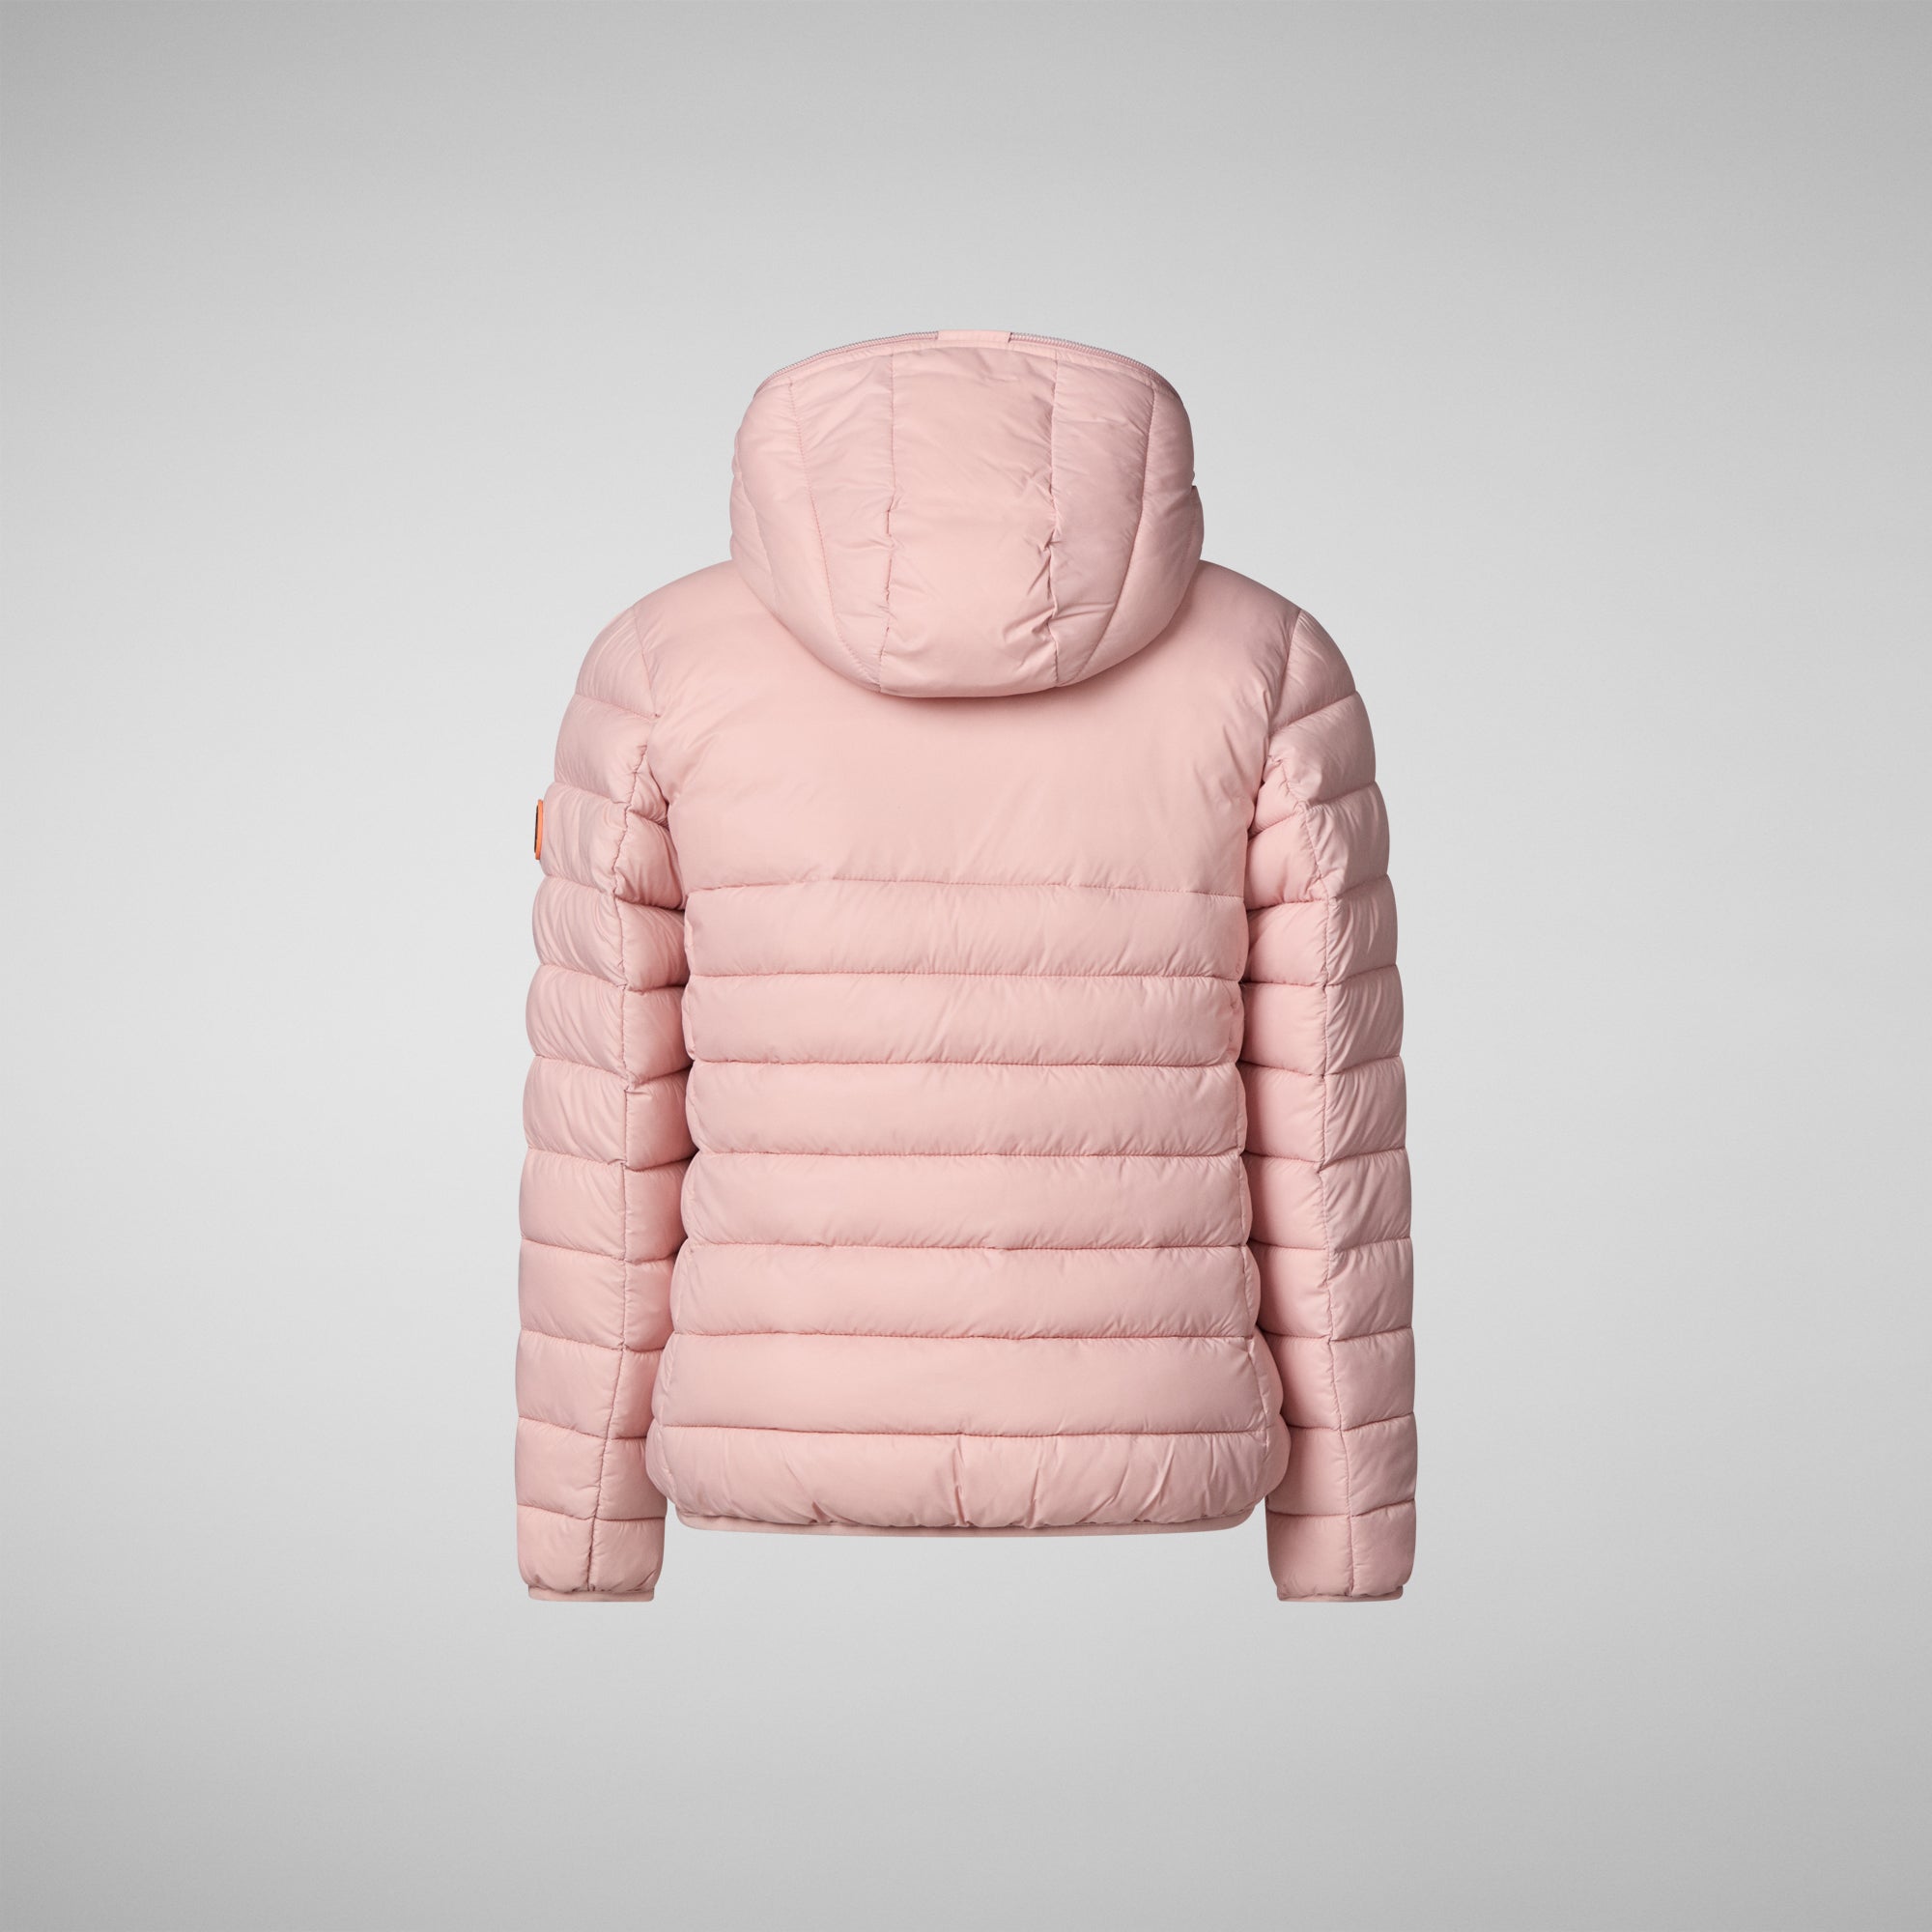 Girls' Leci Hooded Puffer Jacket with Faux Fur Lining in Blush Pink